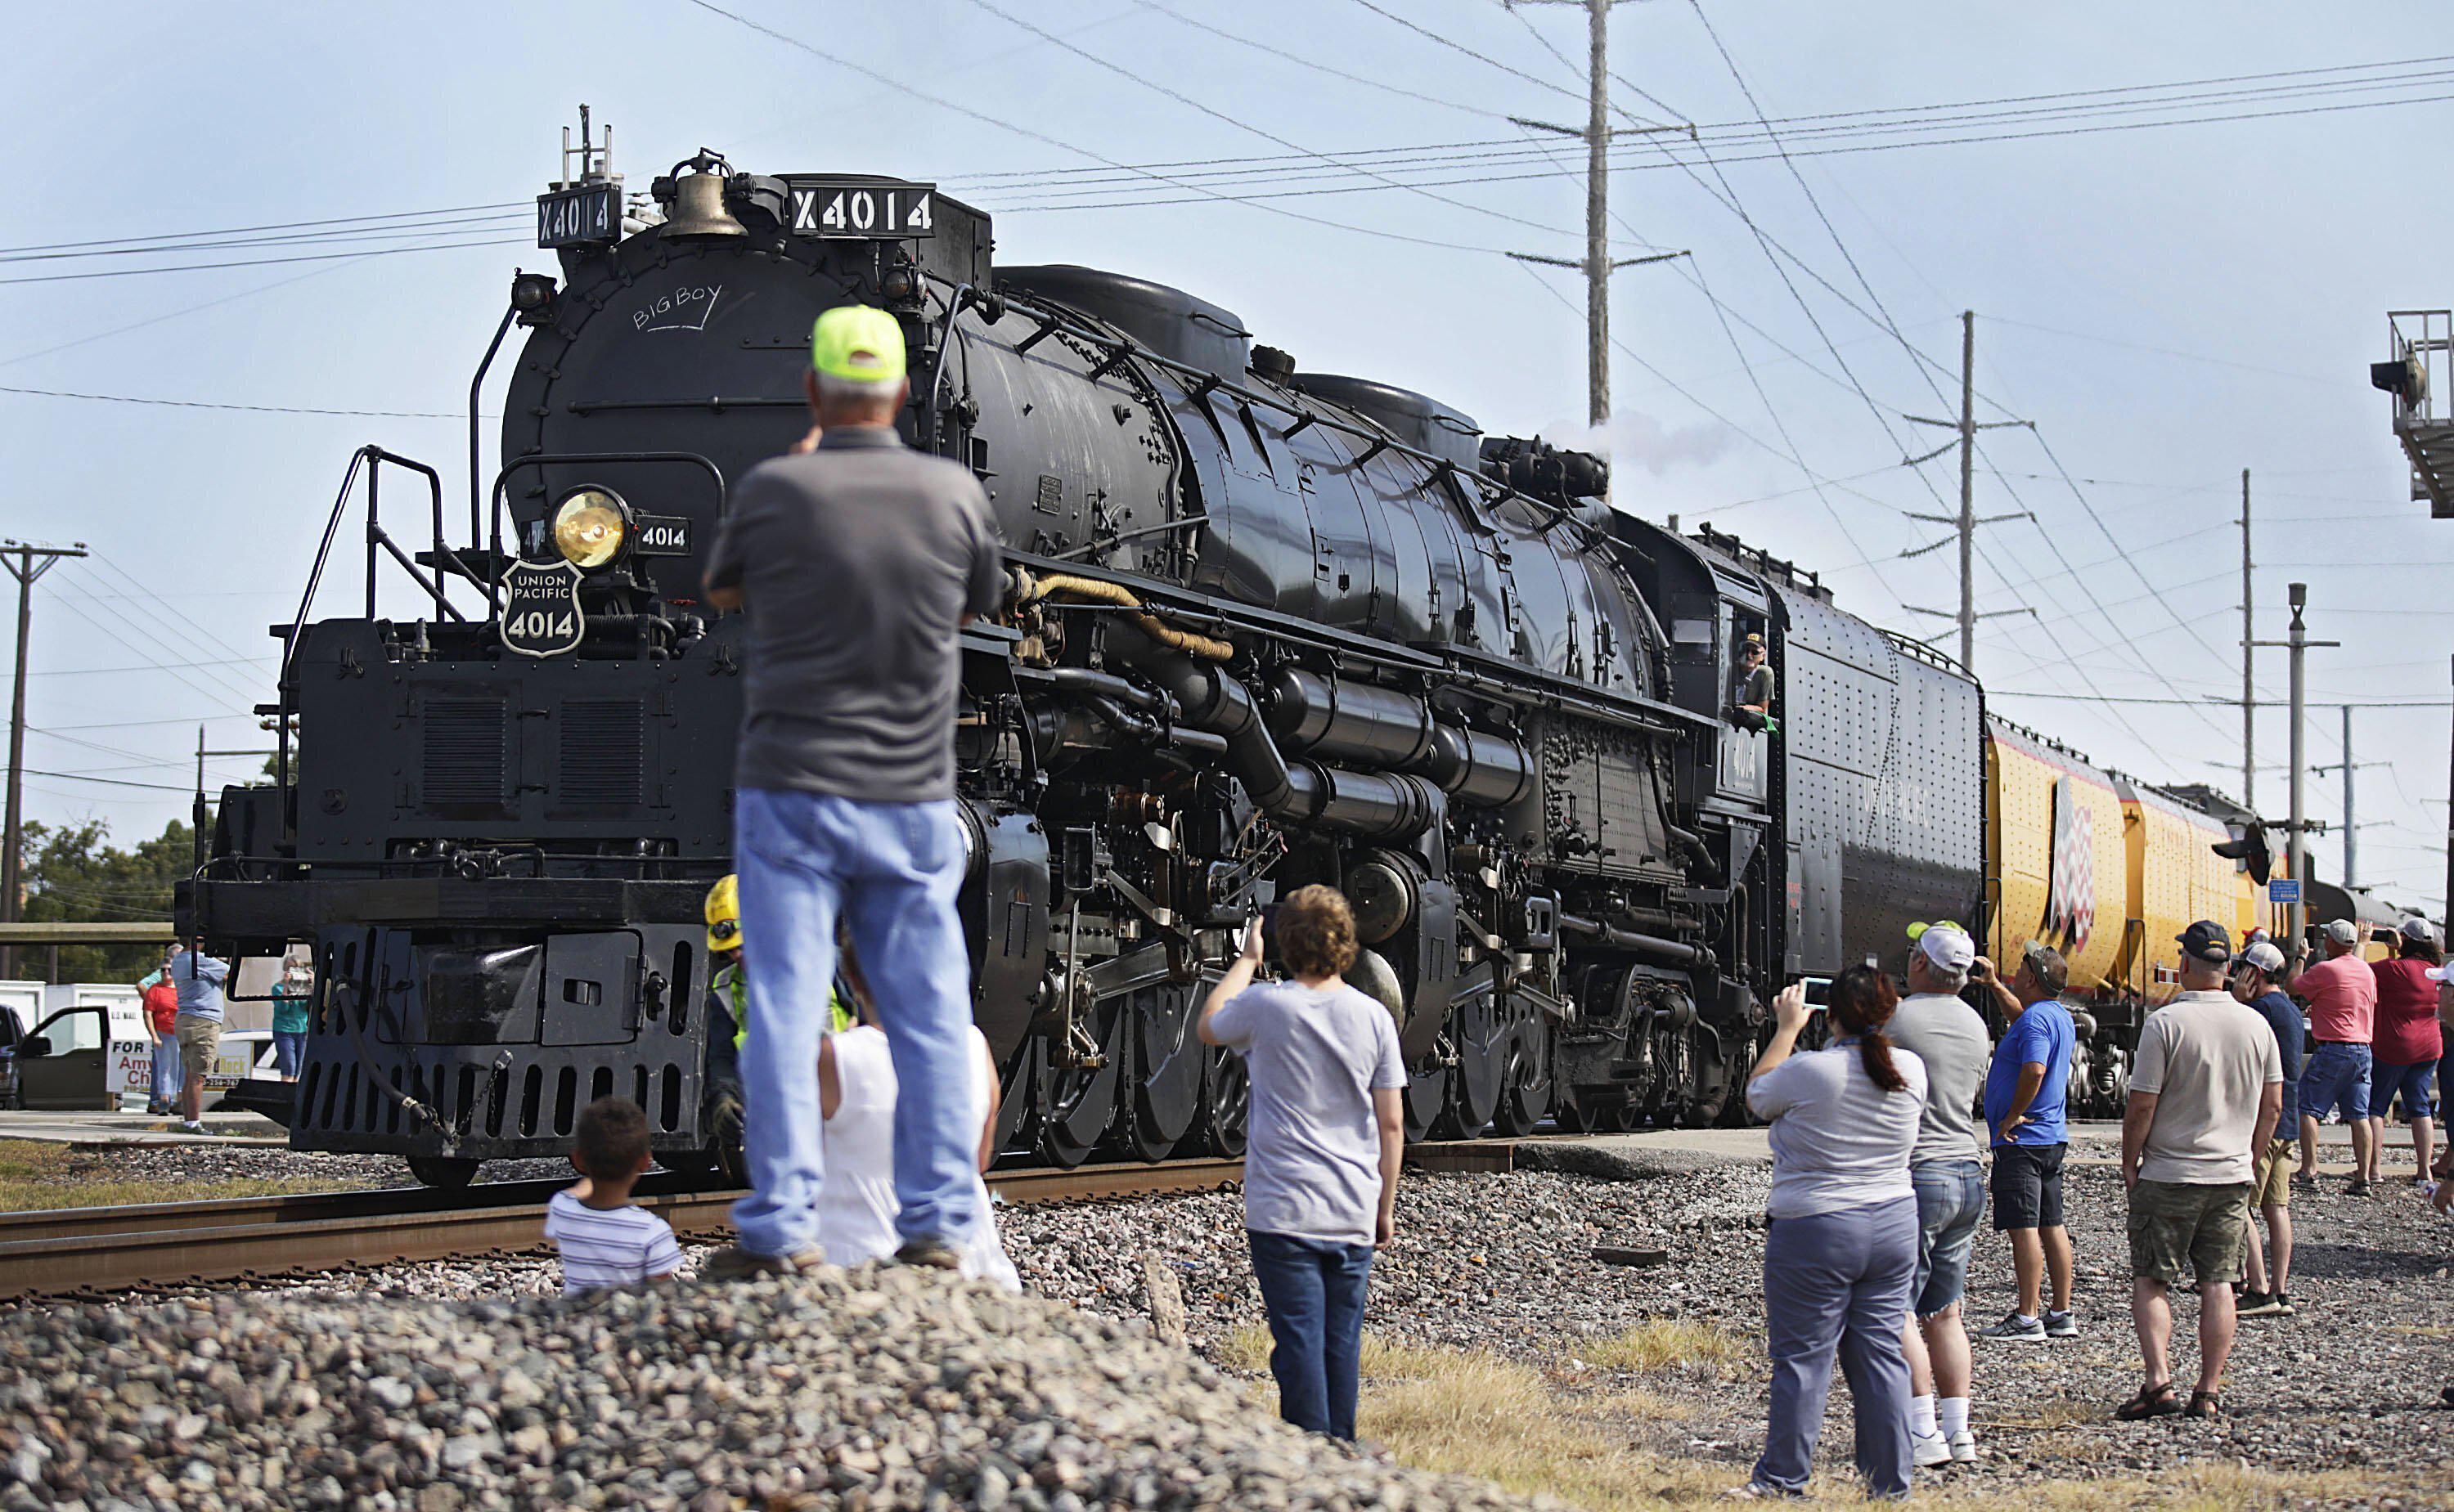 Giant Steam Locomotive Sets Louisiana Stops On 10 State Tour